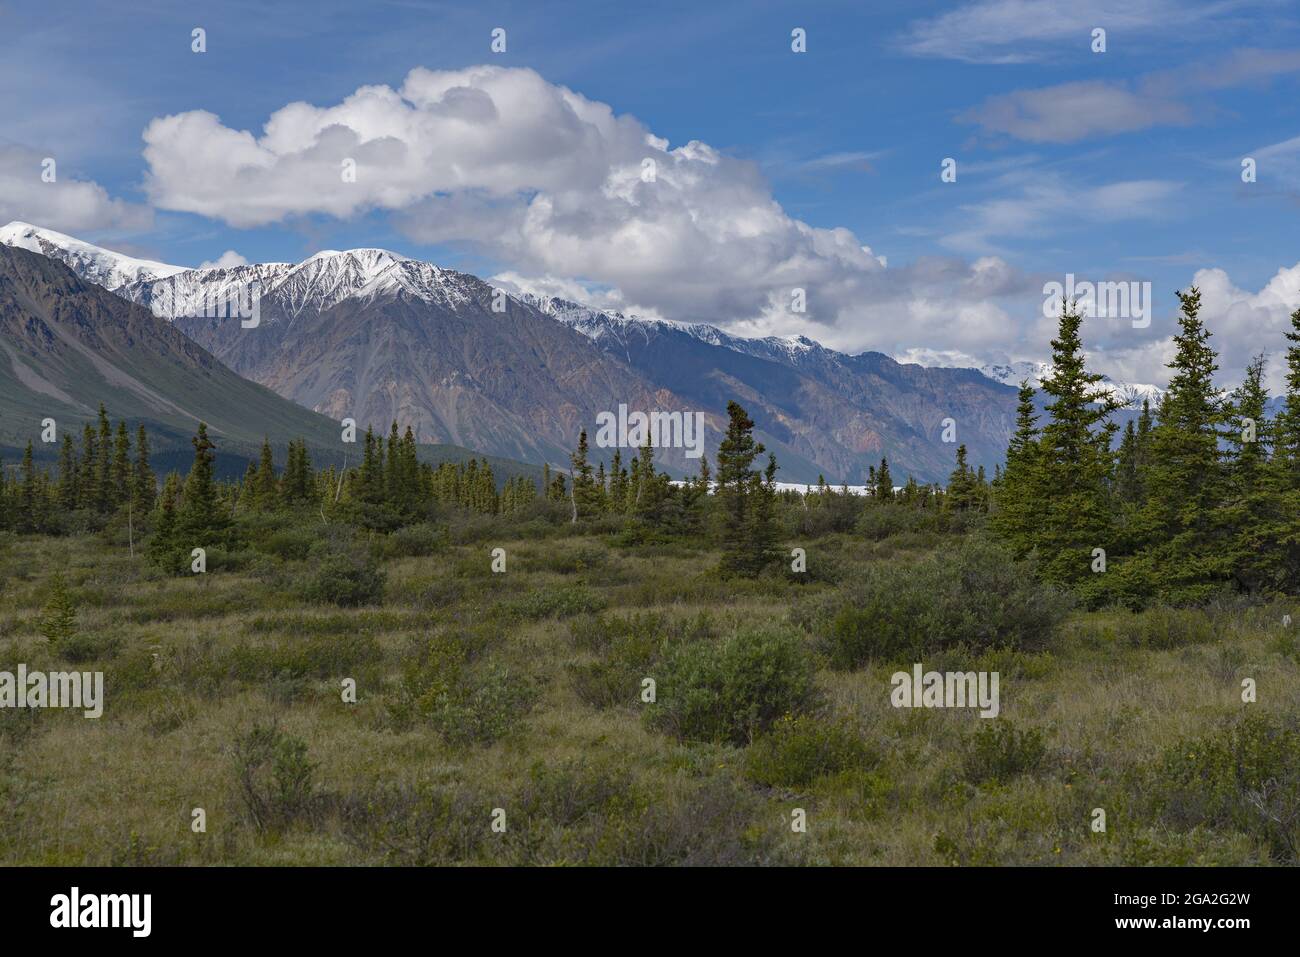 The landscape of Kluane National Park, grassy rangeland and snowcapped mountains with billowing clouds in a blue sky. An amazing place of huge moun... Stock Photo